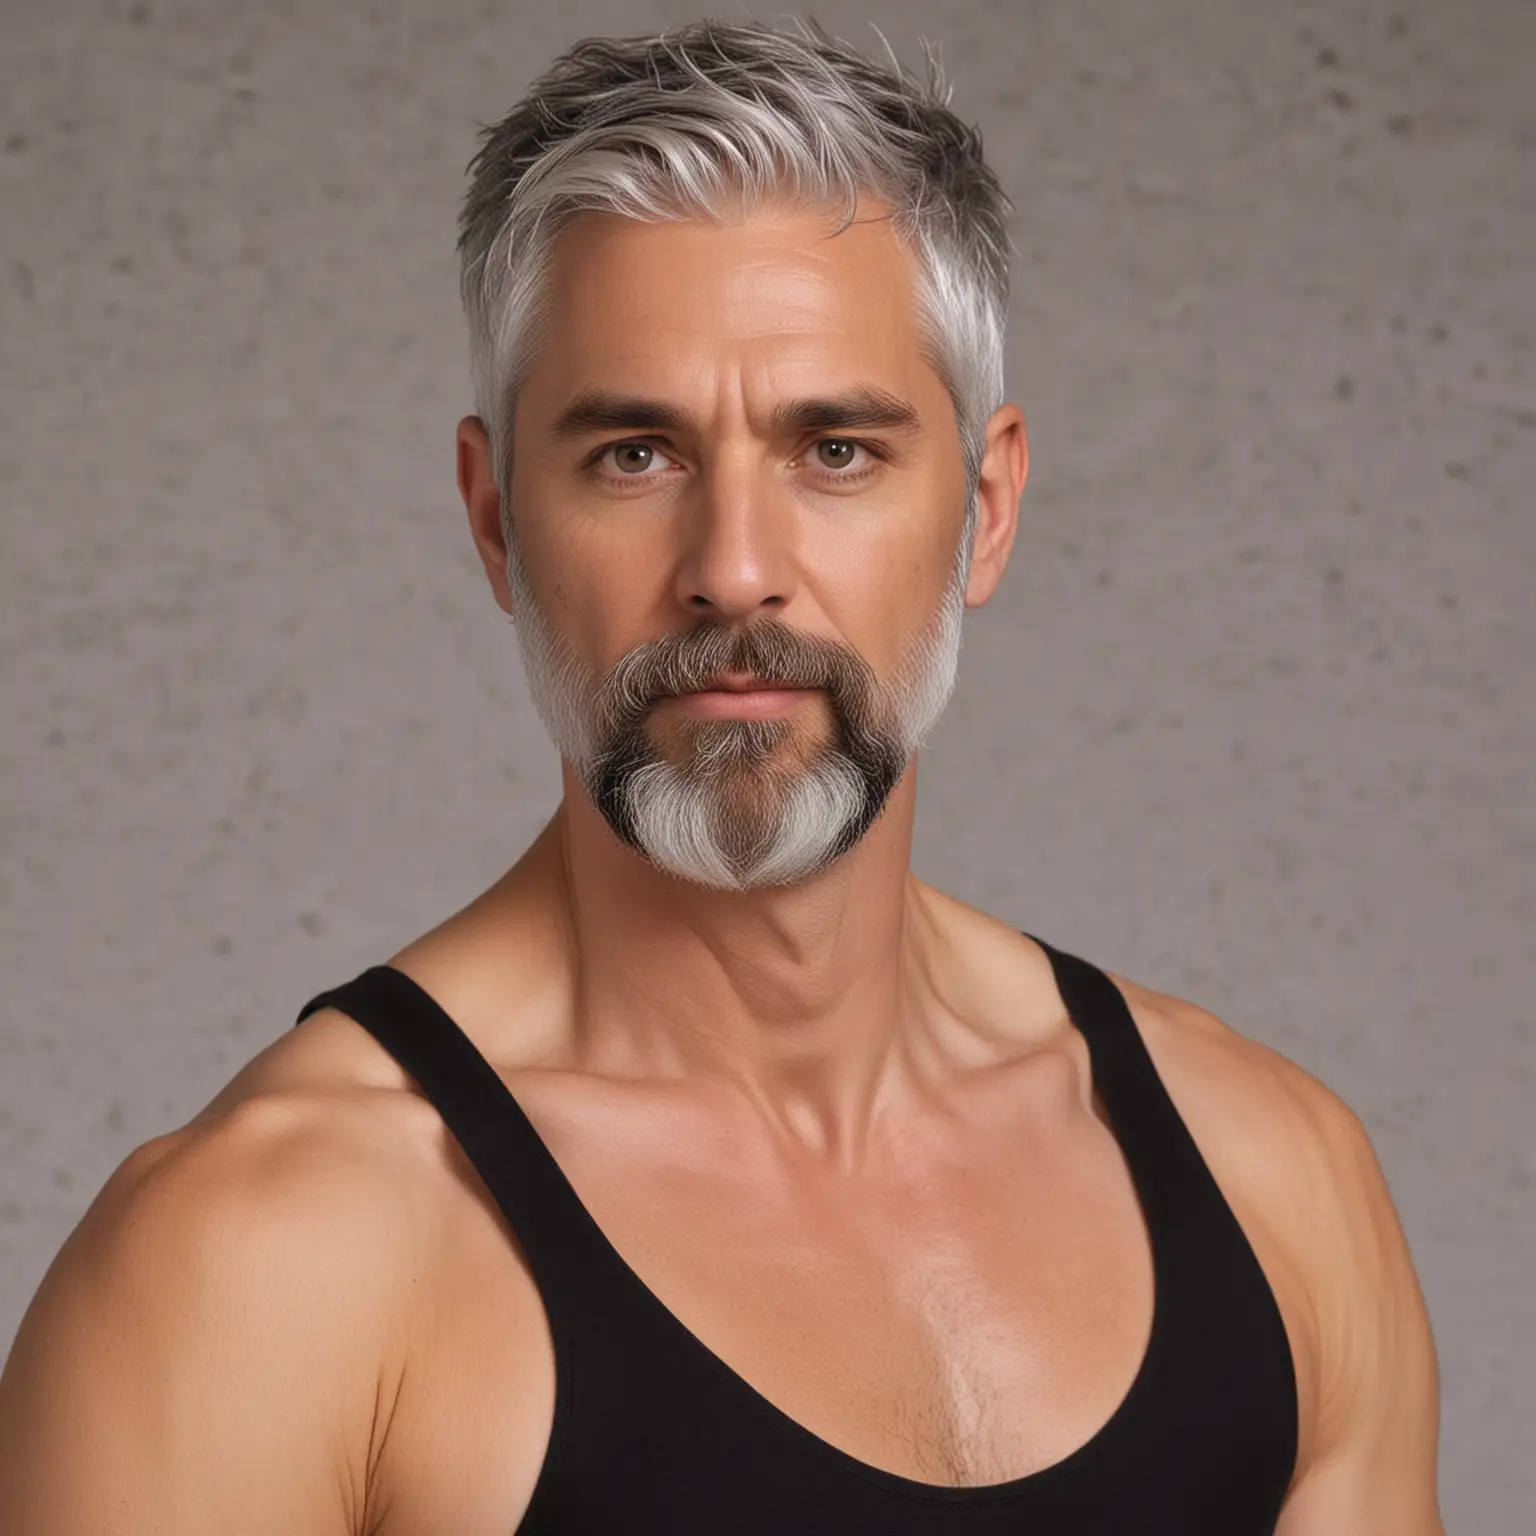 Middleaged-Man-in-Black-Leotard-with-Silver-Hair-and-Beard